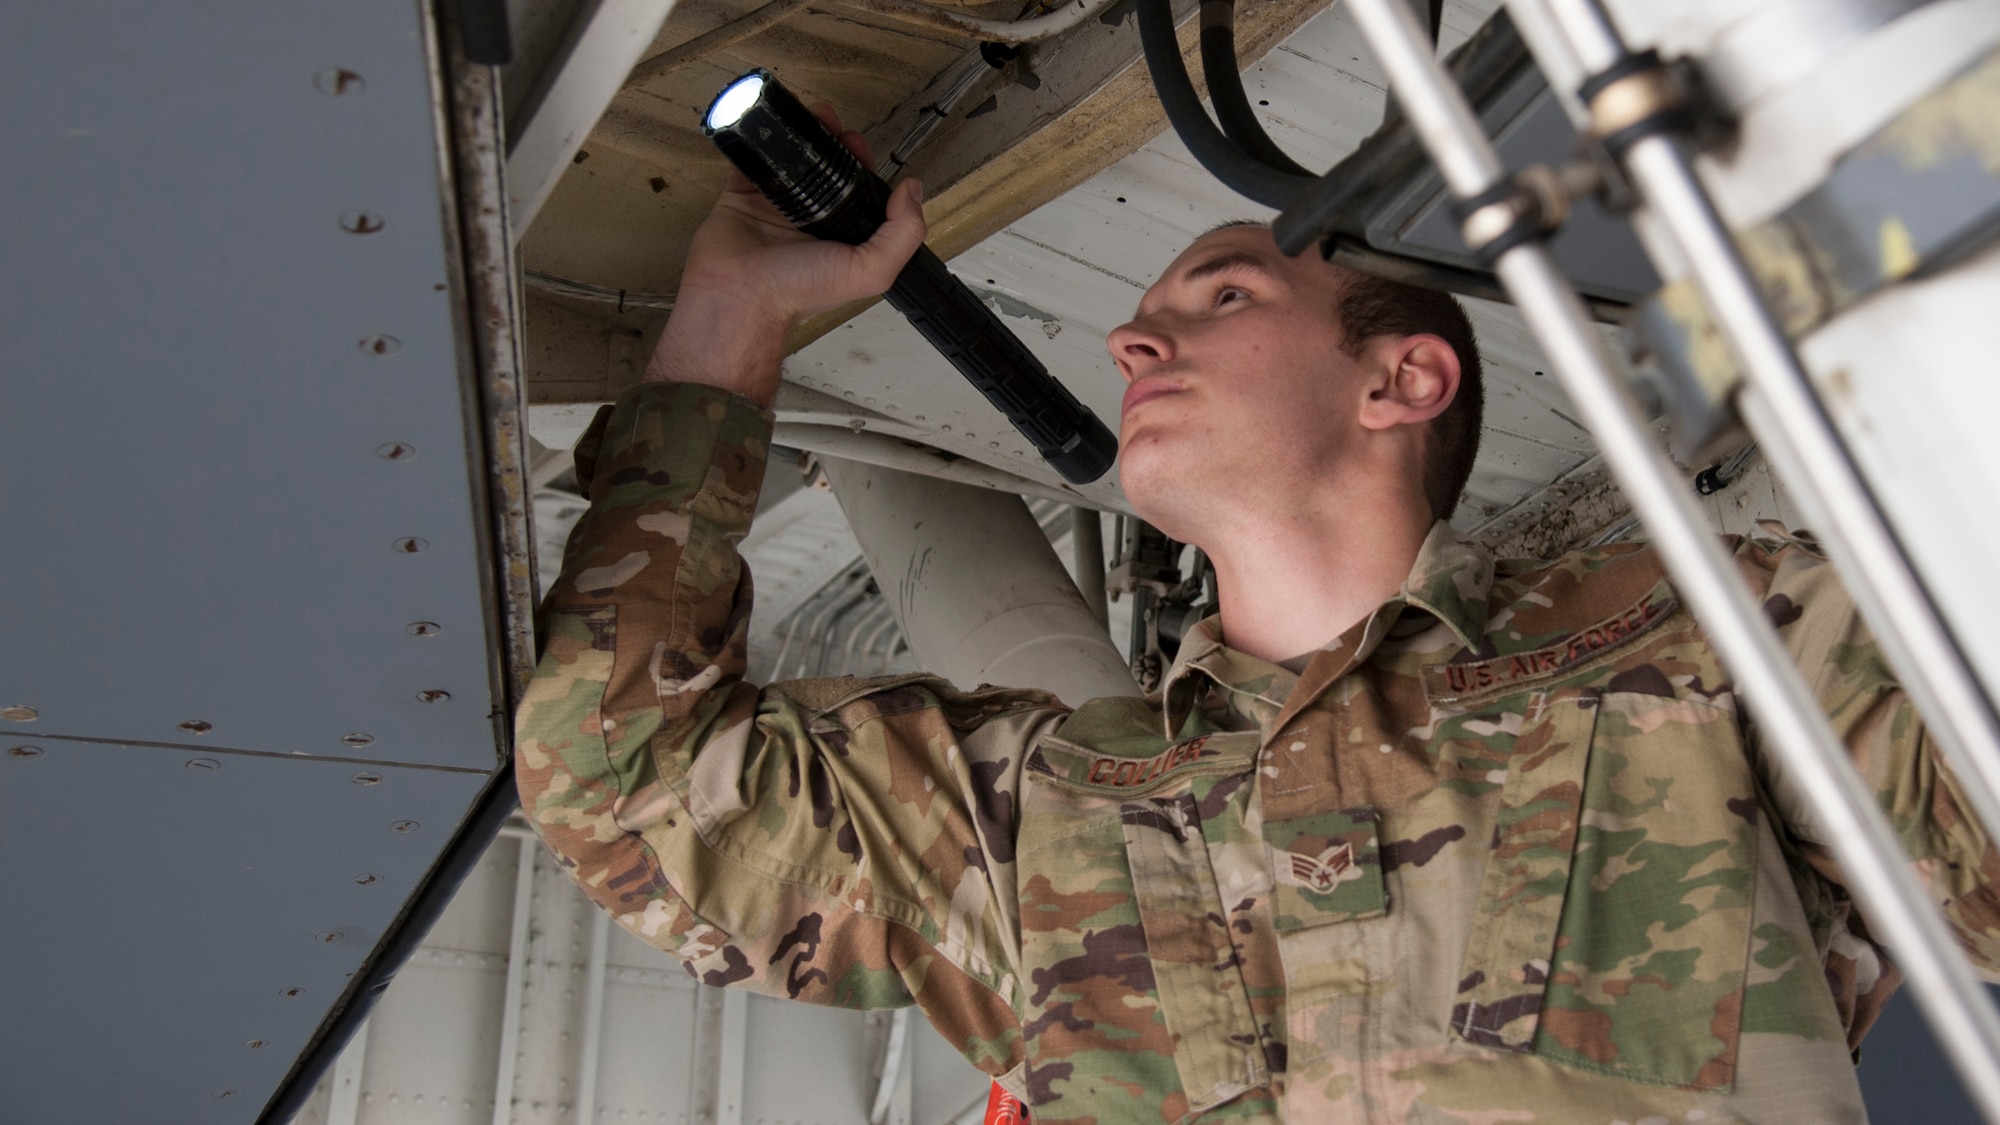 U.S. Air Force Senior Airman Clayton Collier, a 6th Aircraft Maintenance Squadron (AMXS) crew chief, inspects landing gear systems on a KC-135 Stratotanker, Jan. 23, 2020, at MacDill Crew chiefs assigned to the 6th AMXS perform aircraft maintenance and conduct inspections and servicing to ensure the KC-135 accomplishes its primary mission of global reach.